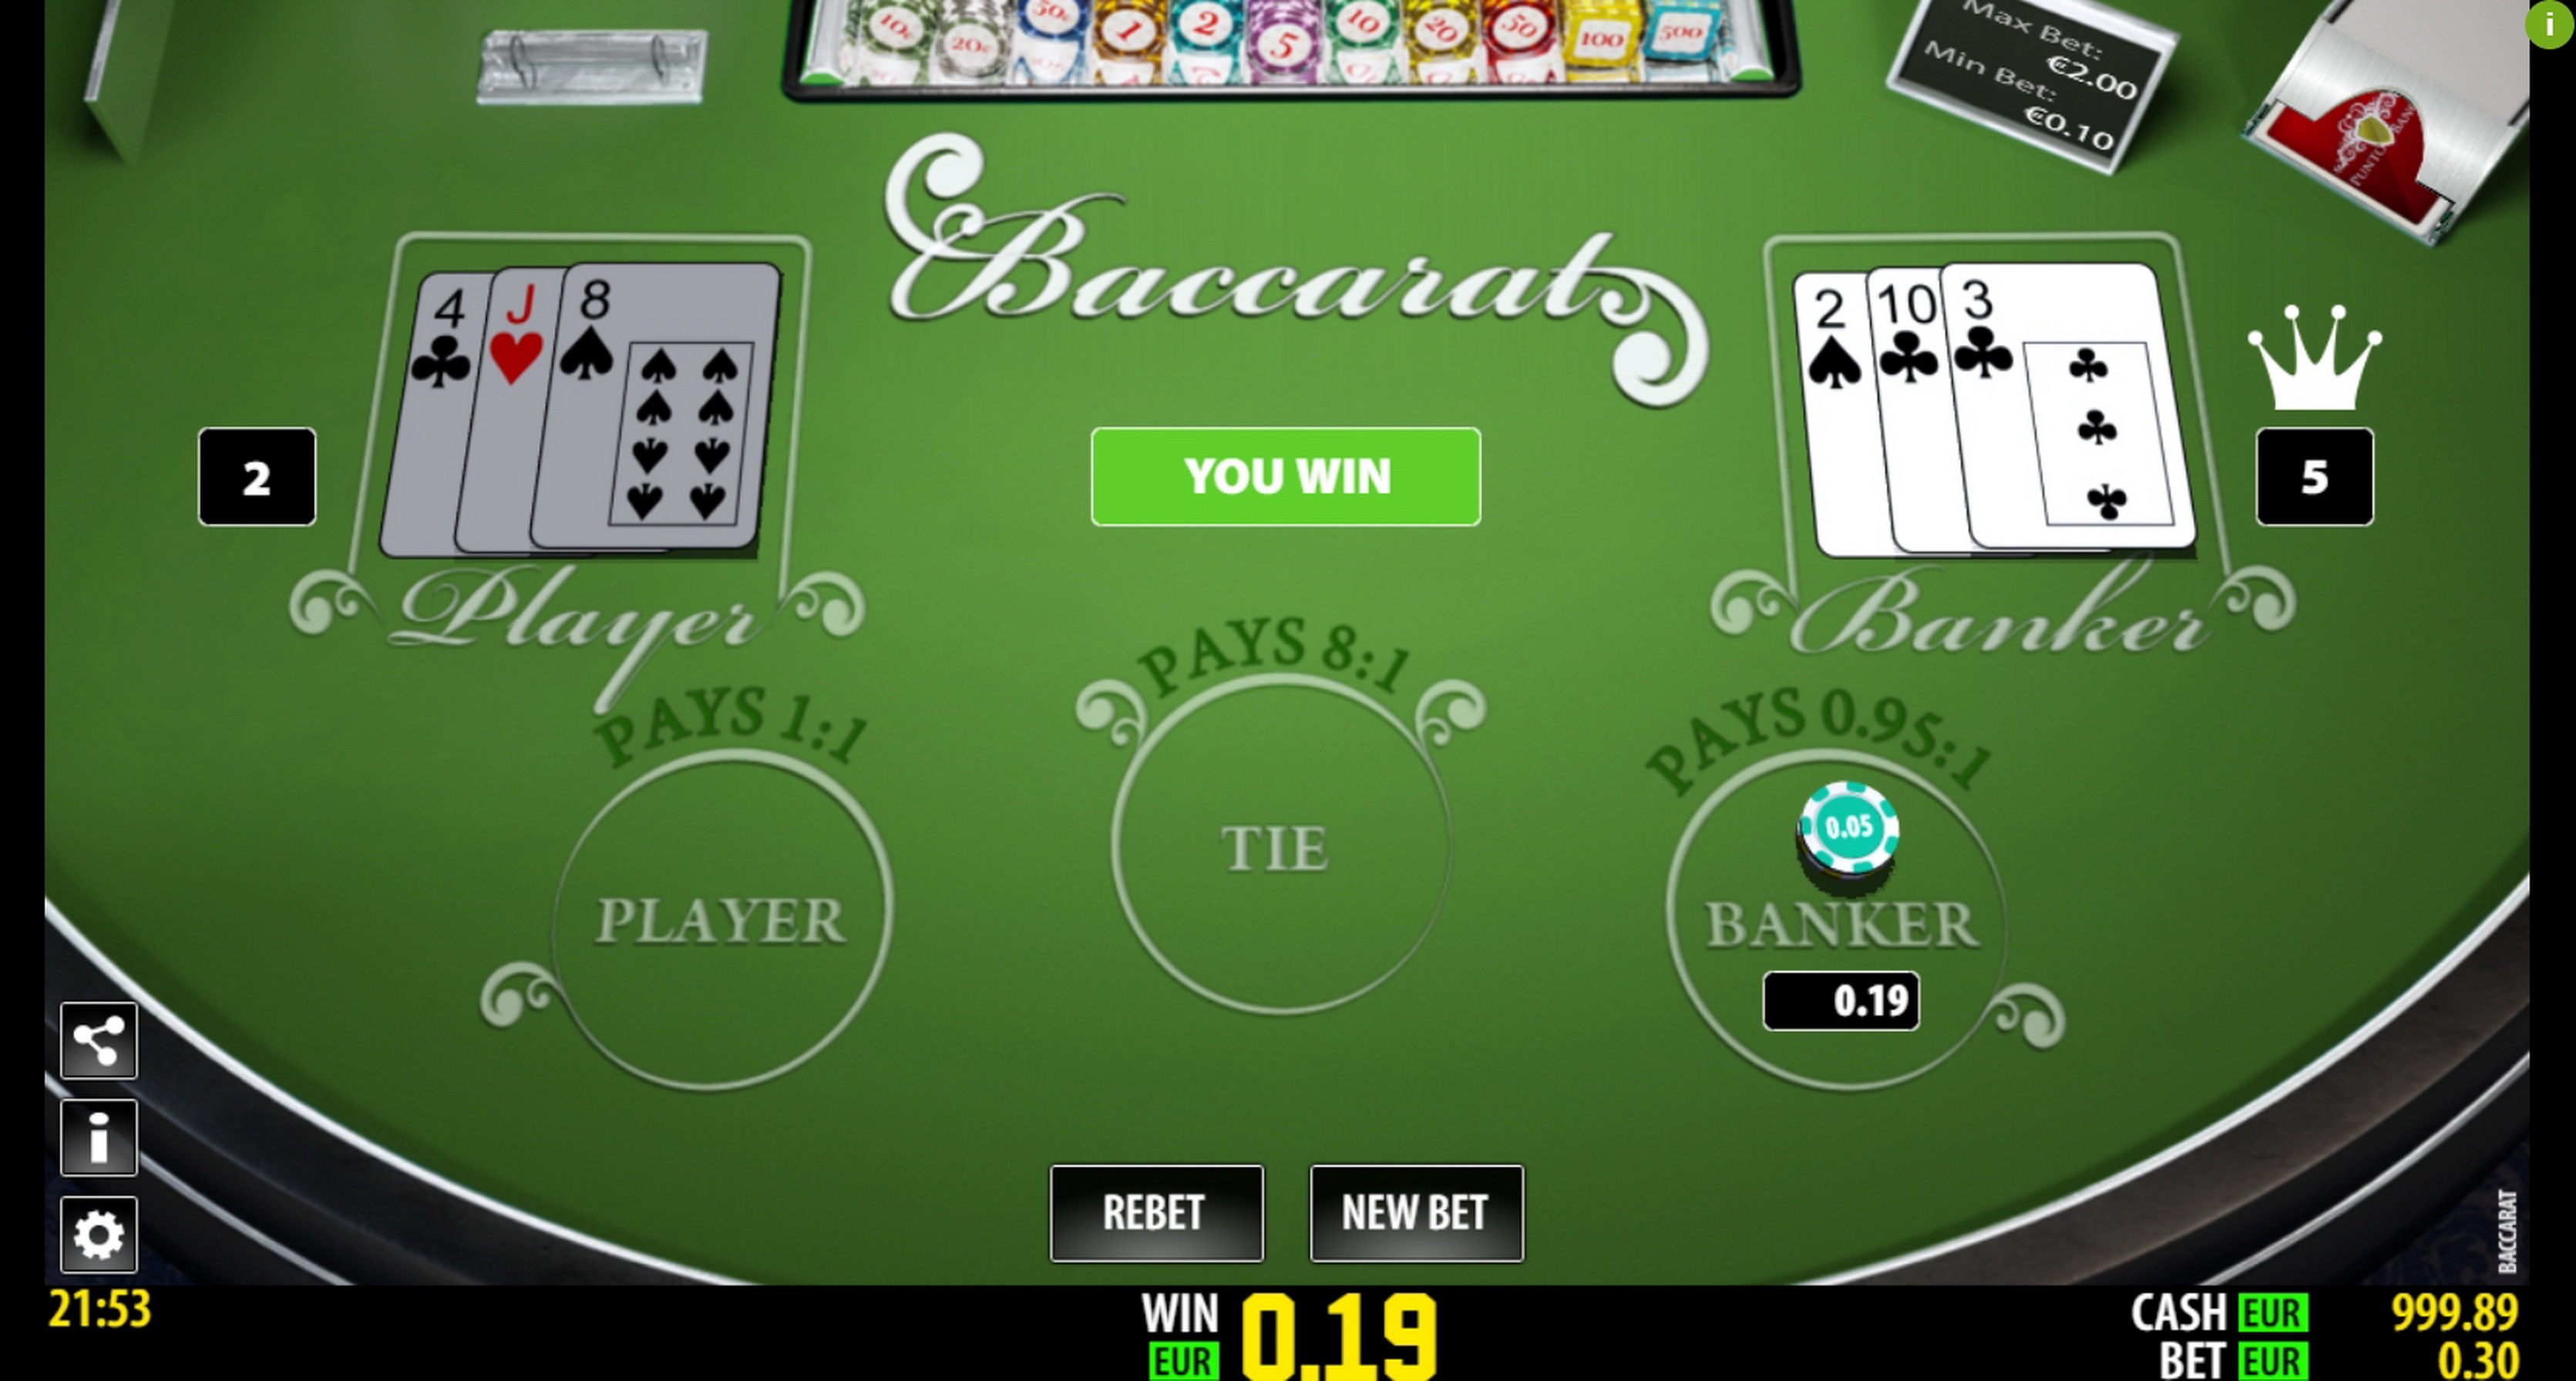 Win Money in Baccarat Free Slot Game by World Match